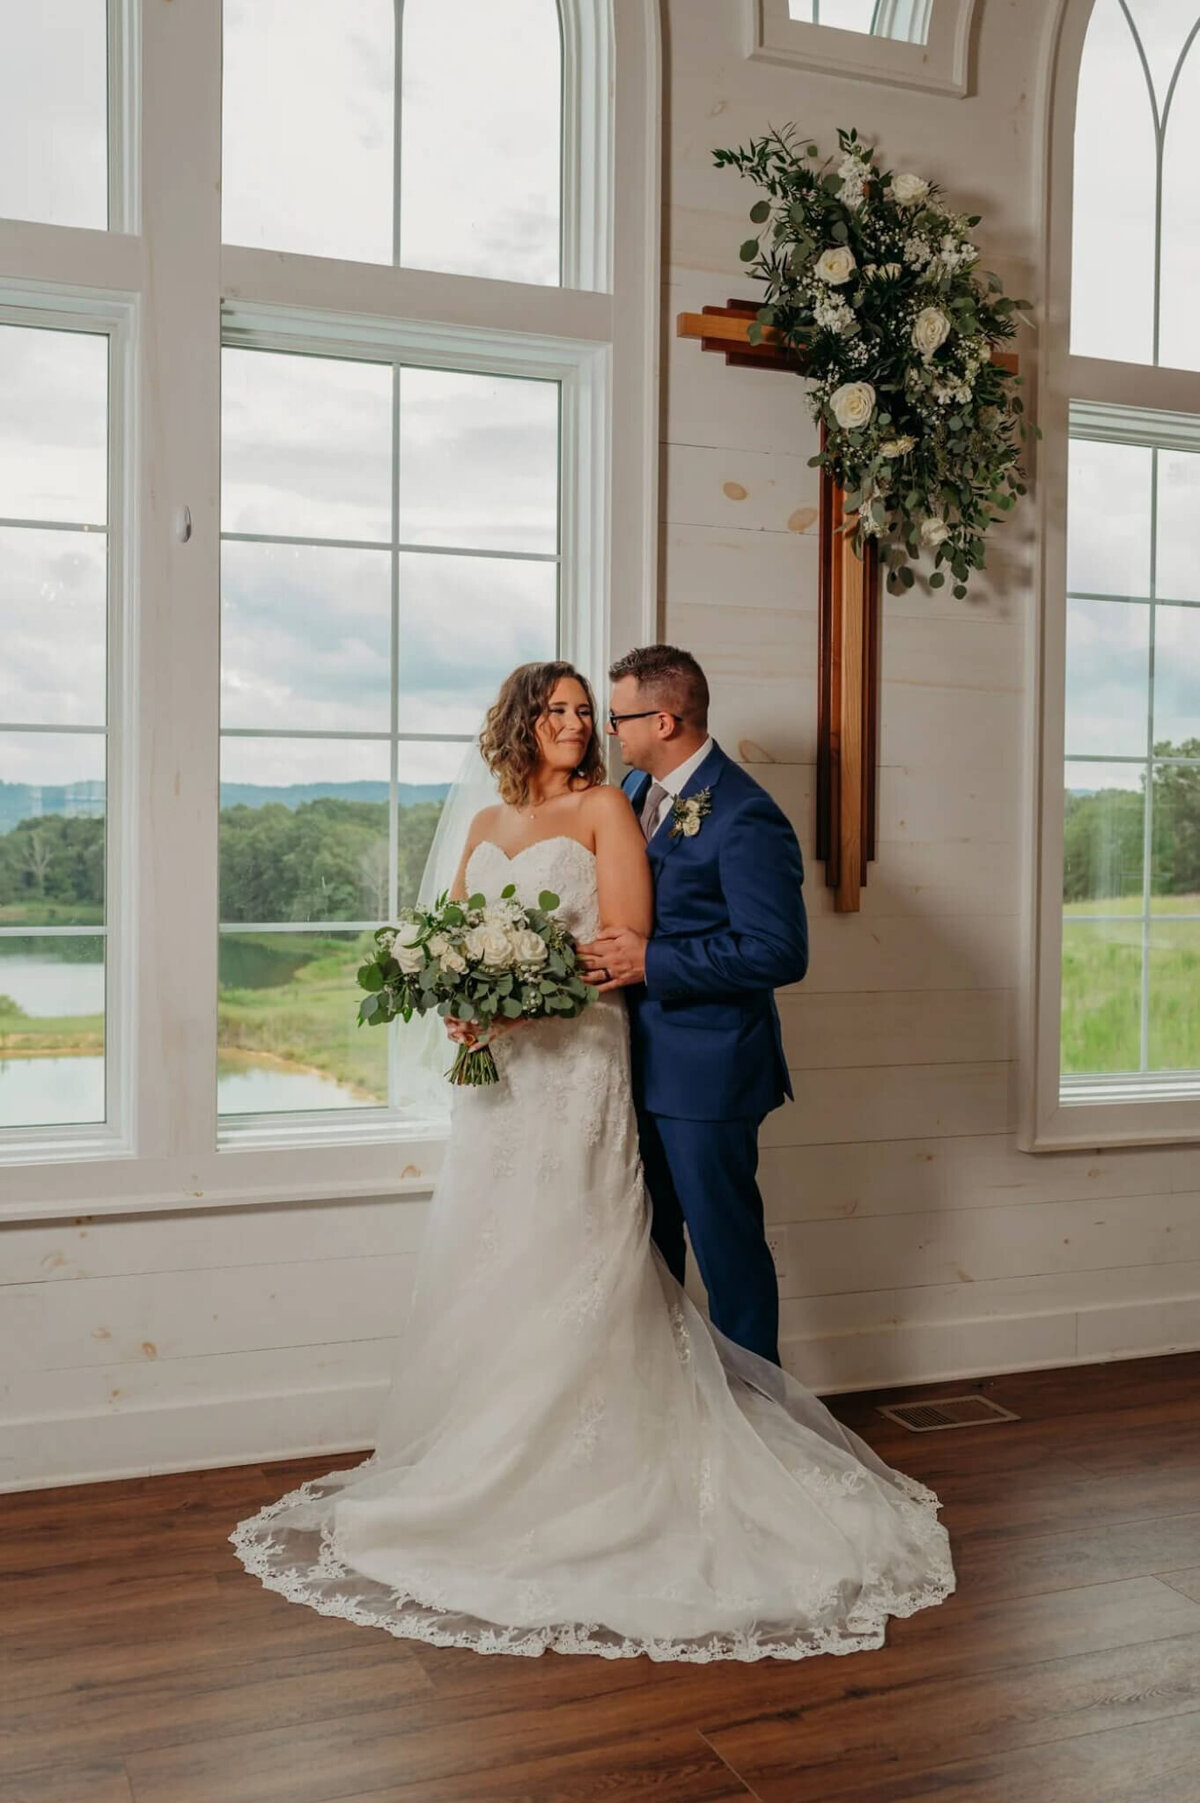 Photo of a groom hugging his bride from behind while standing beside a window with a pod and mountain showing well there is a cross hanging on the wall decorated and florals